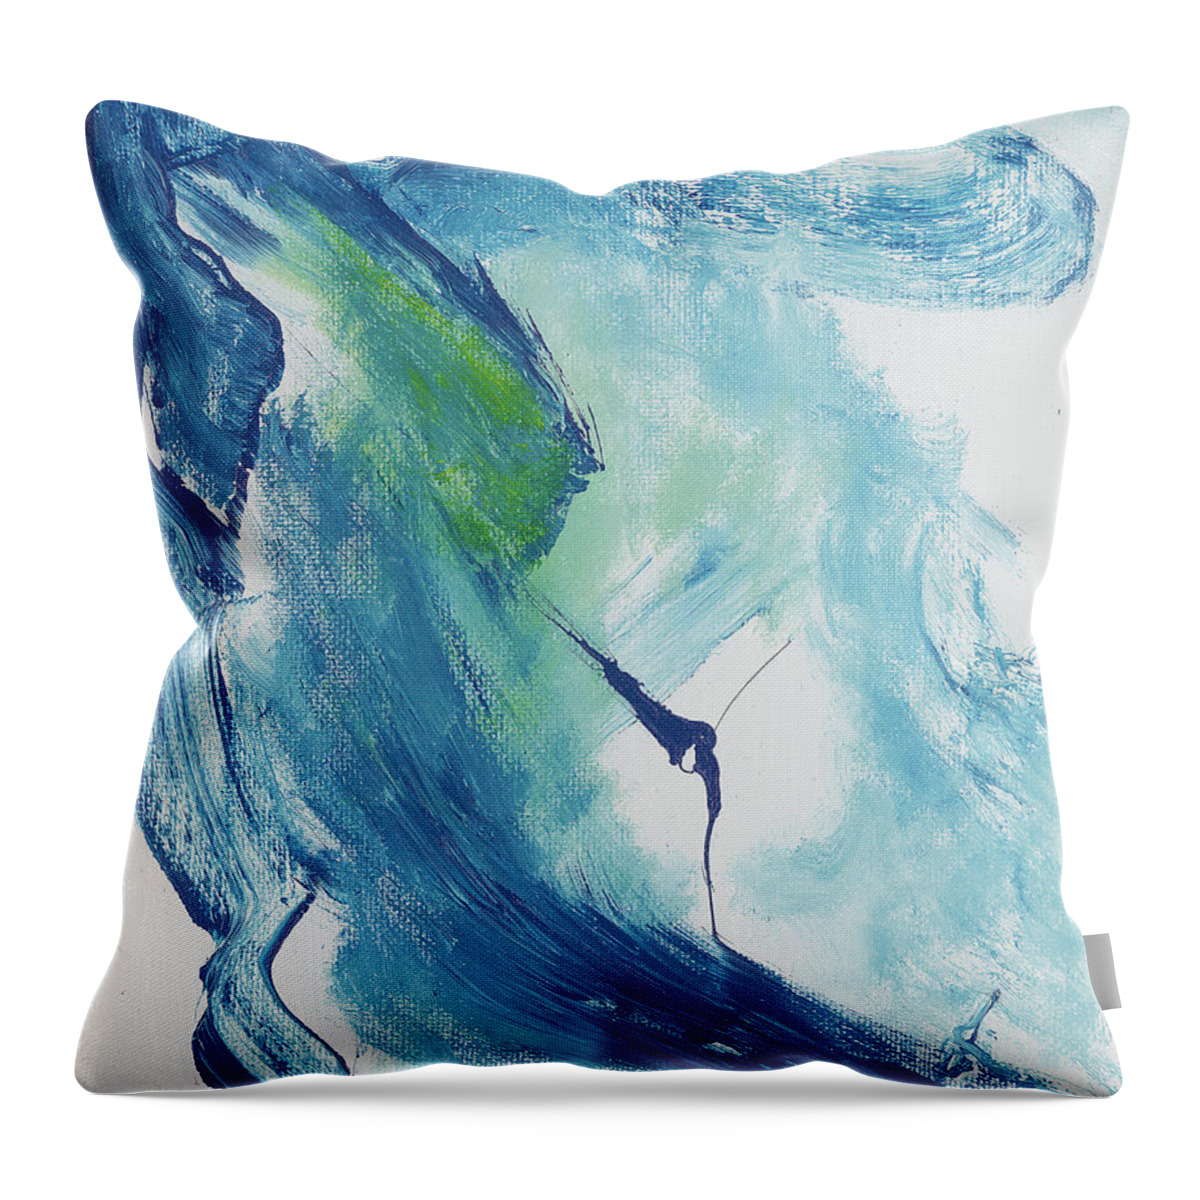 Over Throw Pillow featuring the painting Over The Edge 270 by Joe Loffredo